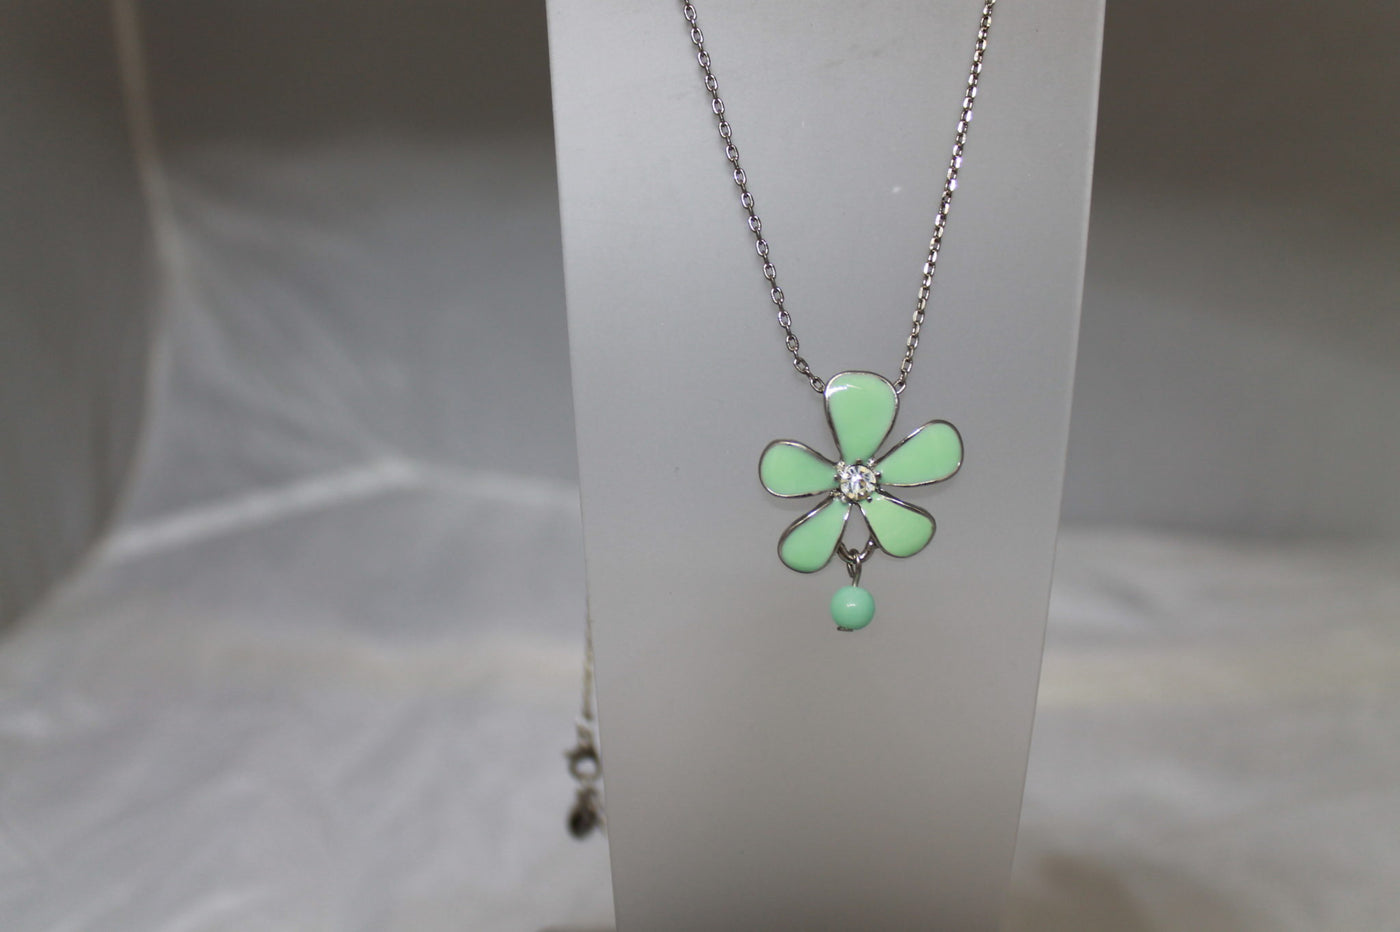 Fashion Necklace with enamel flower